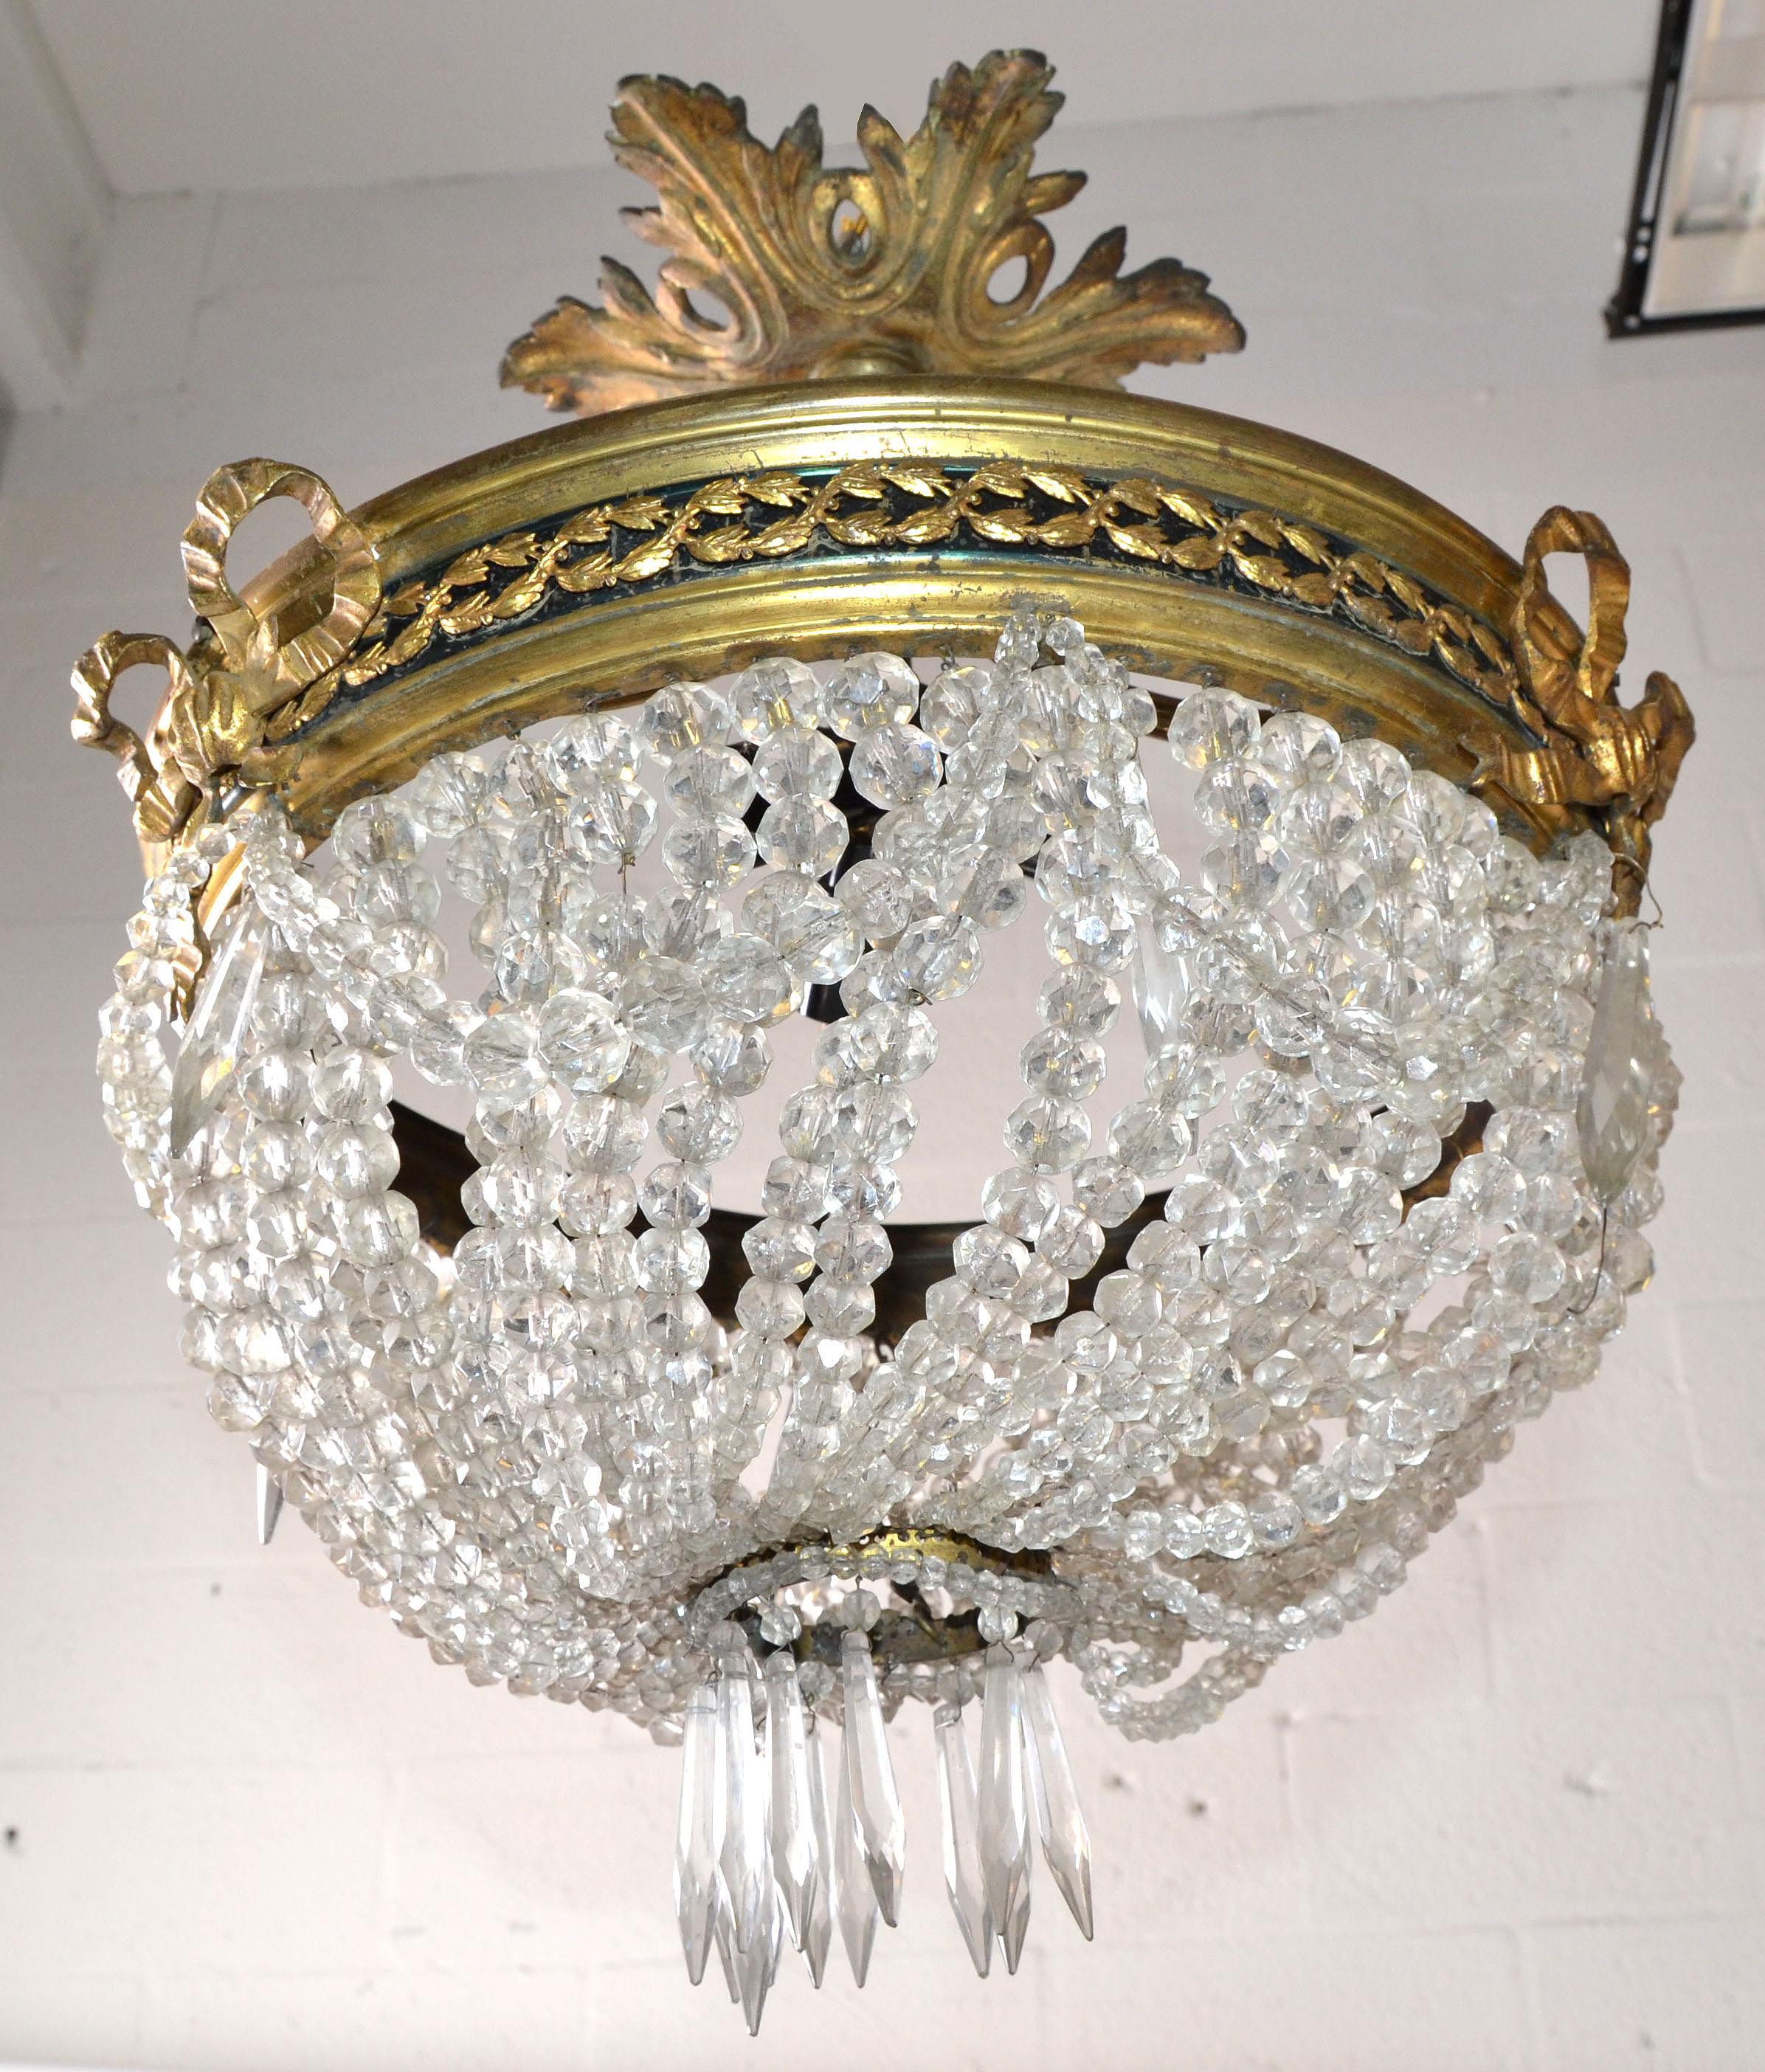 Empire Style early round Bronze and Crystal Chandelier with 3 Light-sockets in the center. 
Wired for the US and takes 3 candelabra light bulbs max. 60 watts.
In original vintage condition with some losses to the brass bows and a few crystals.